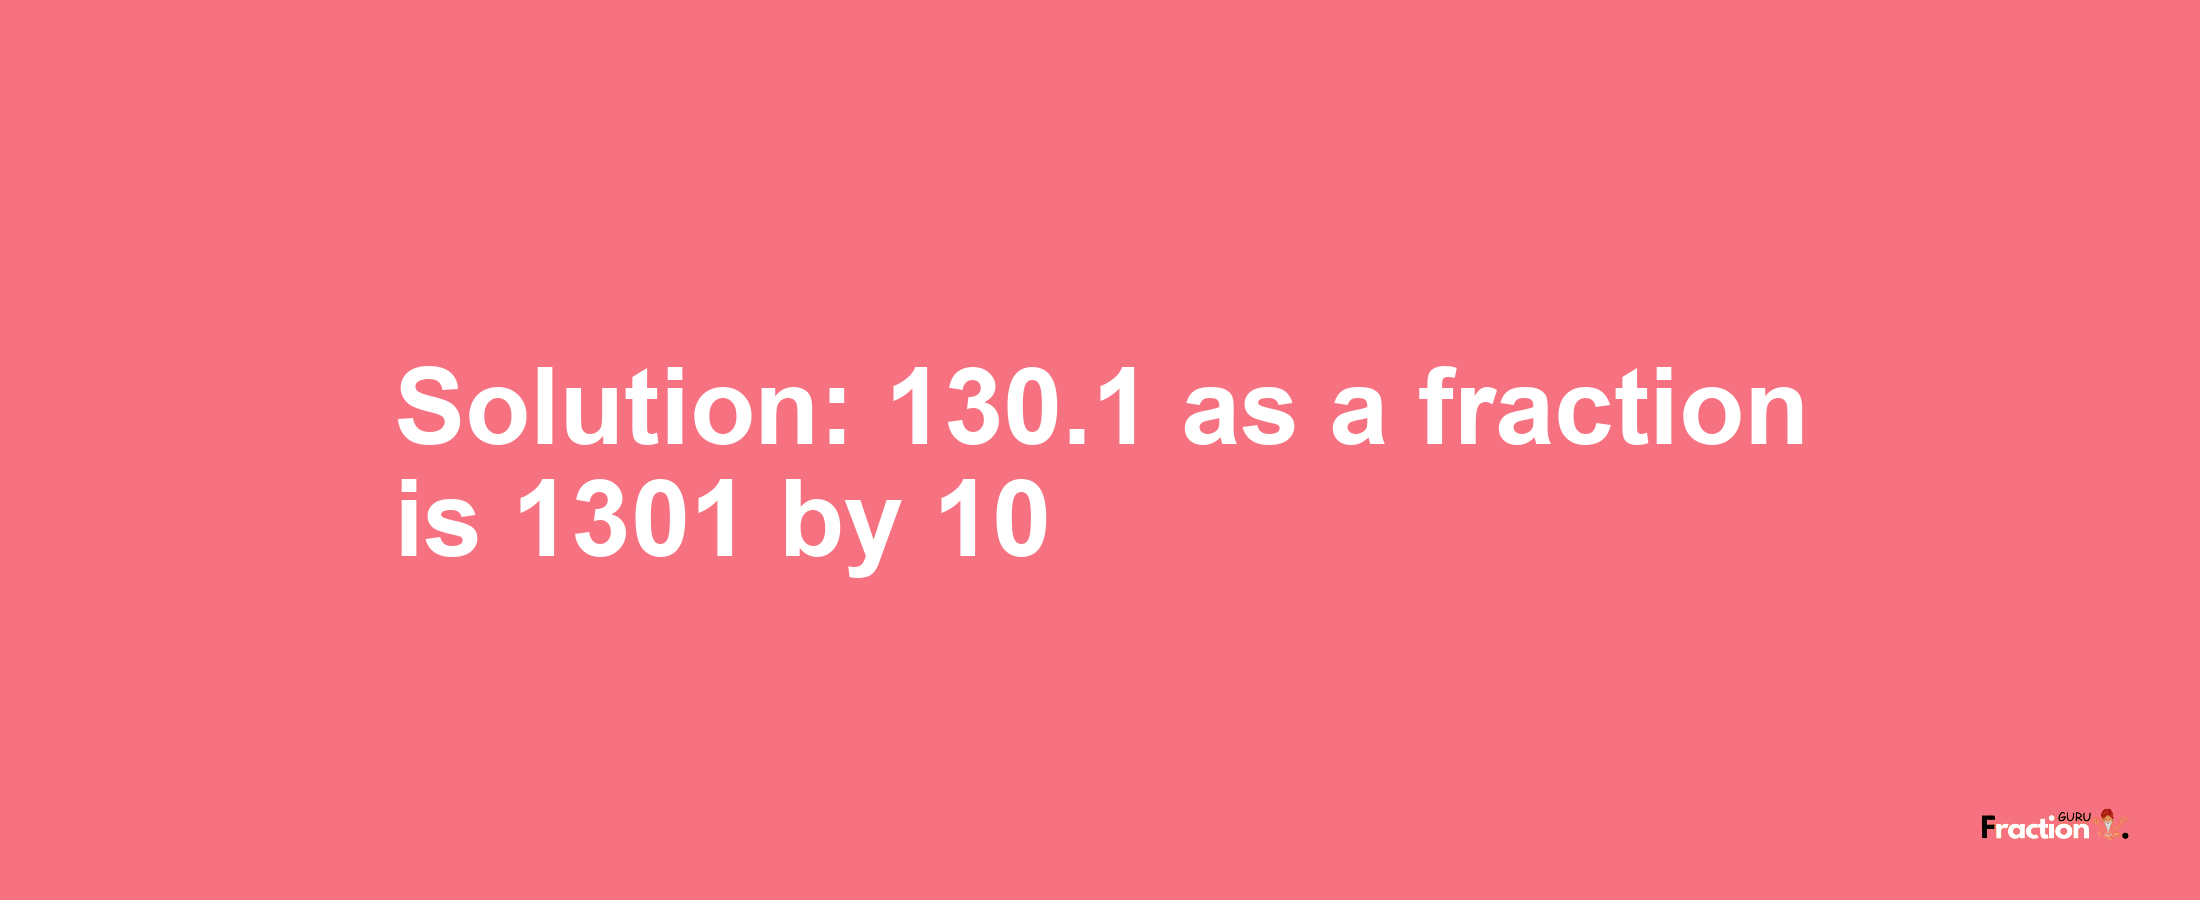 Solution:130.1 as a fraction is 1301/10